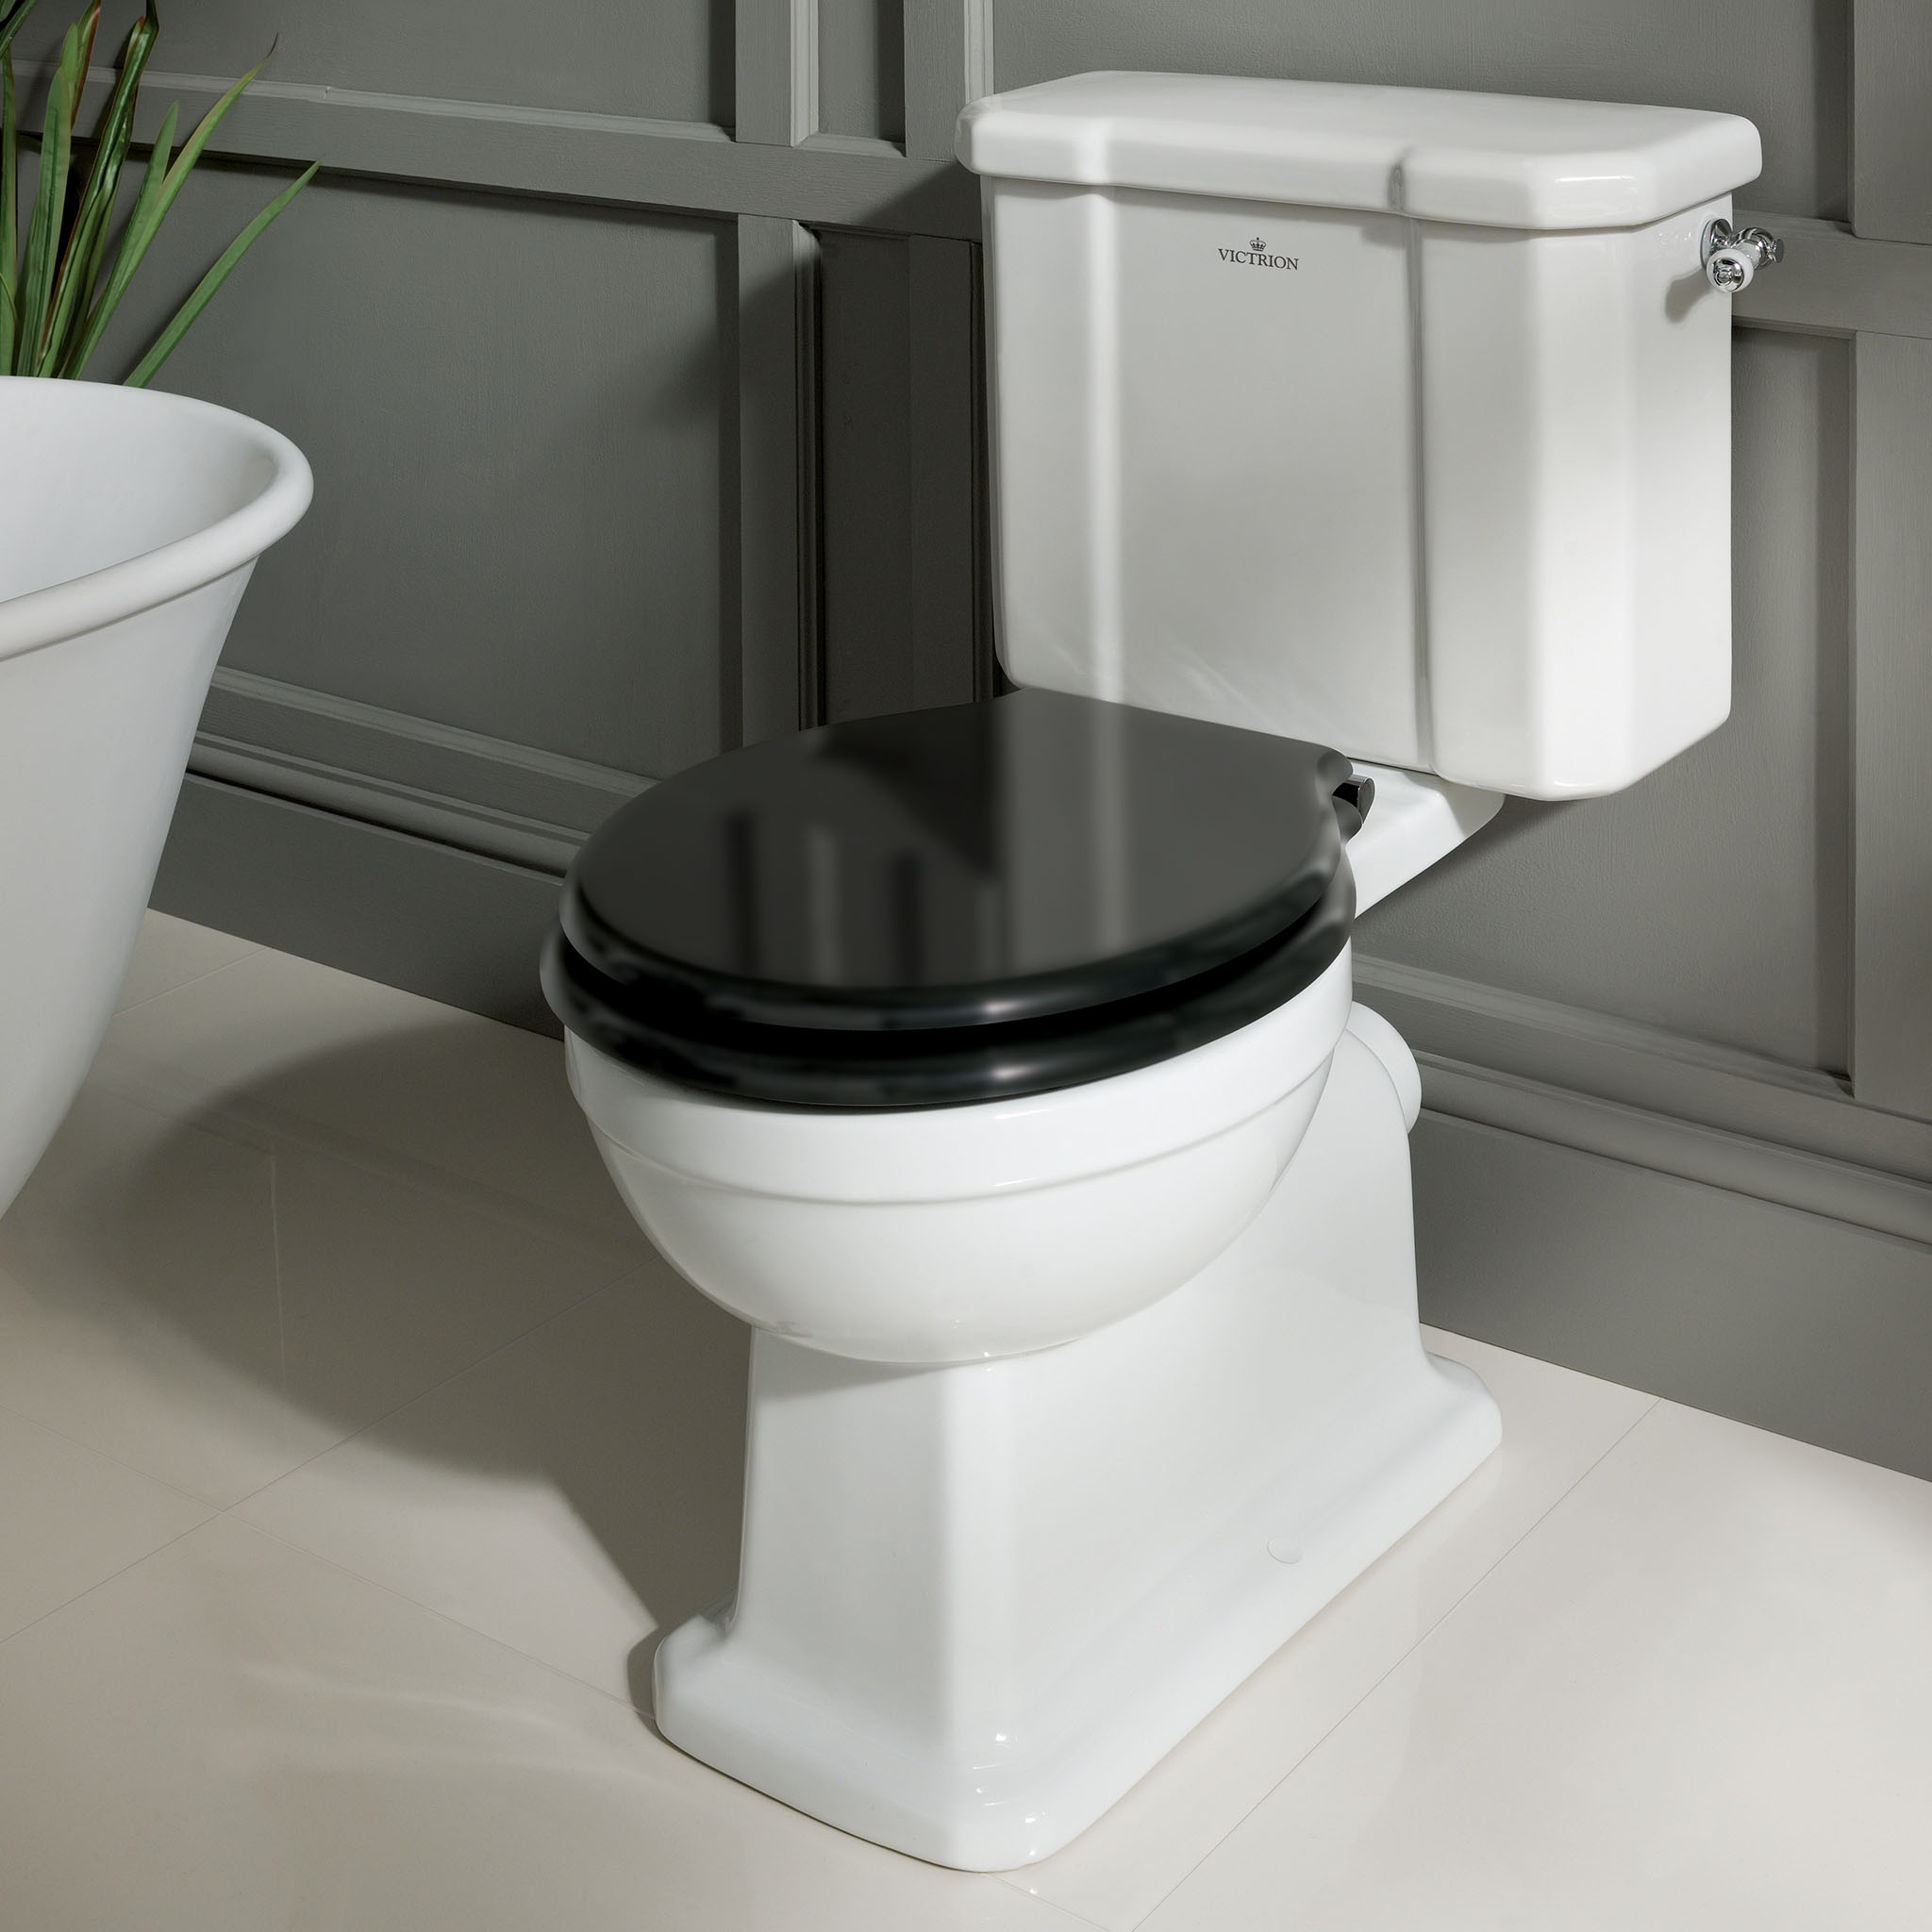 BC Designs Victrion Close Coupled Pan & Cistern (Without Seat)